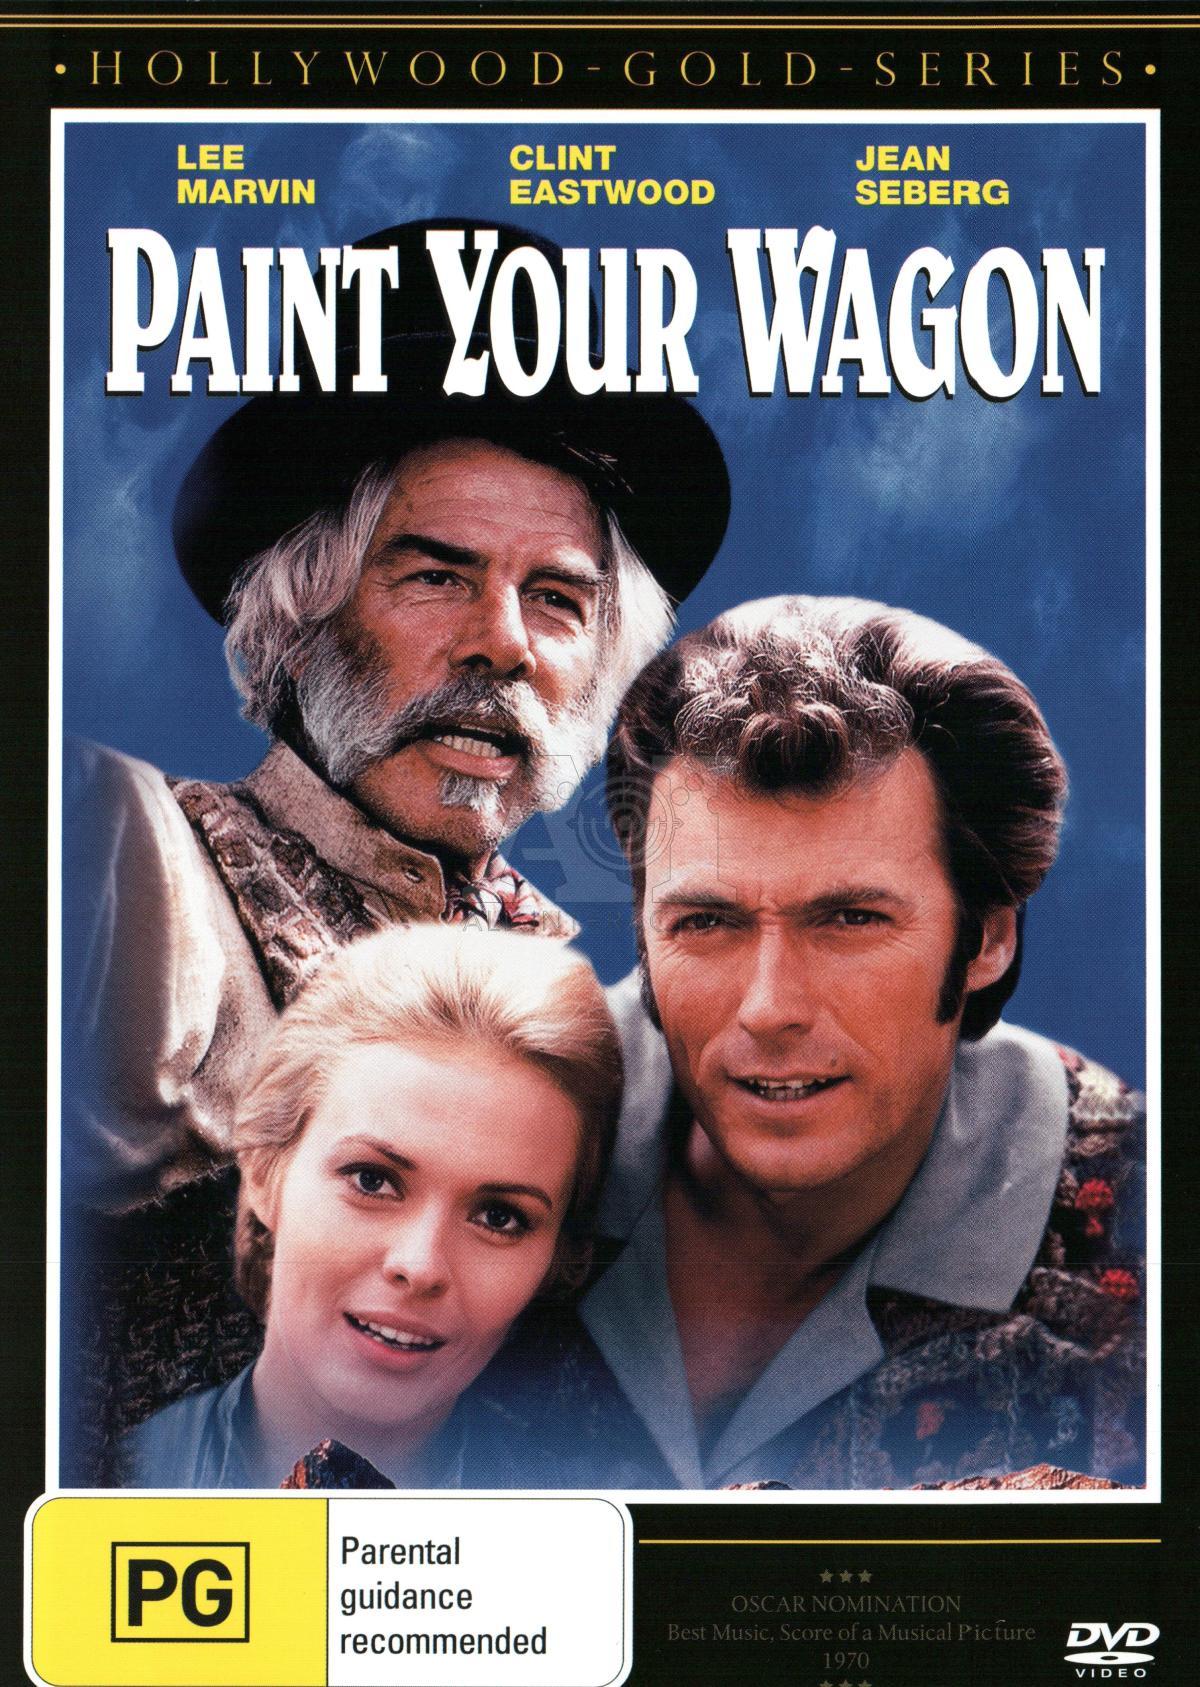 Paint Your Wagon - Lee Marvin DVD - Film Classics